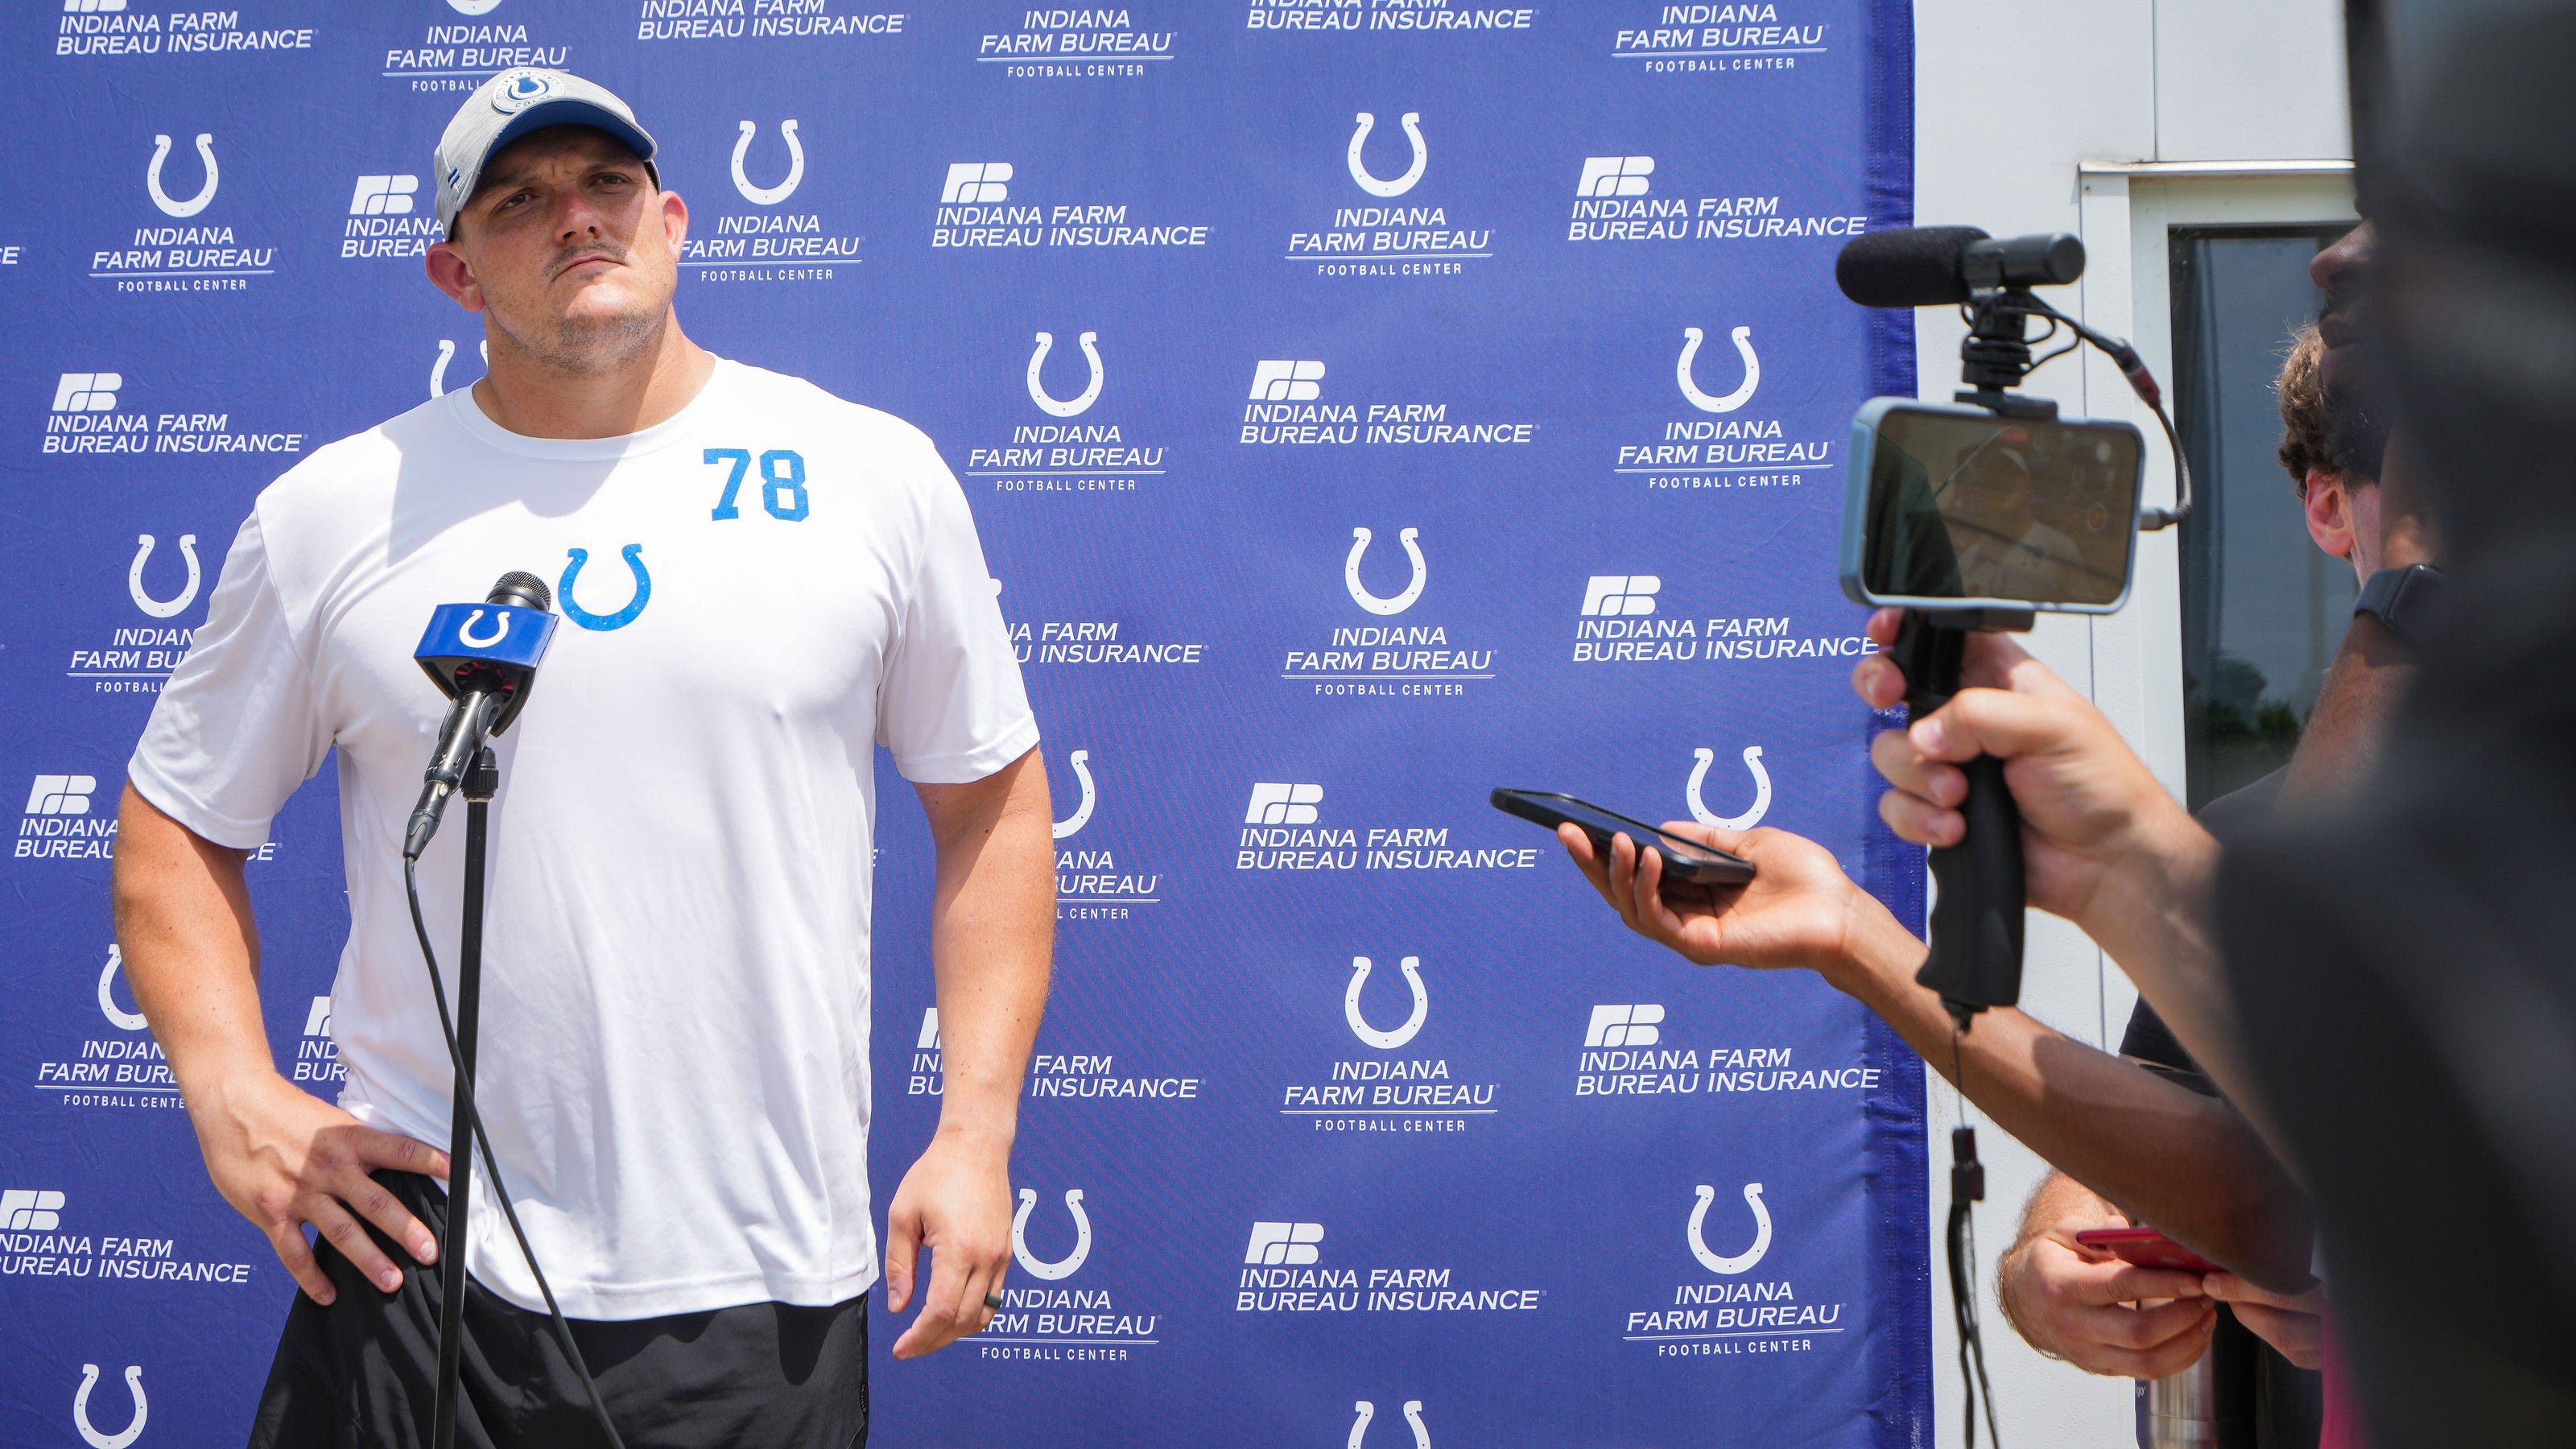 Colts center Ryan Kelly vehemently disagrees with Roger Goodell's push for 18 games